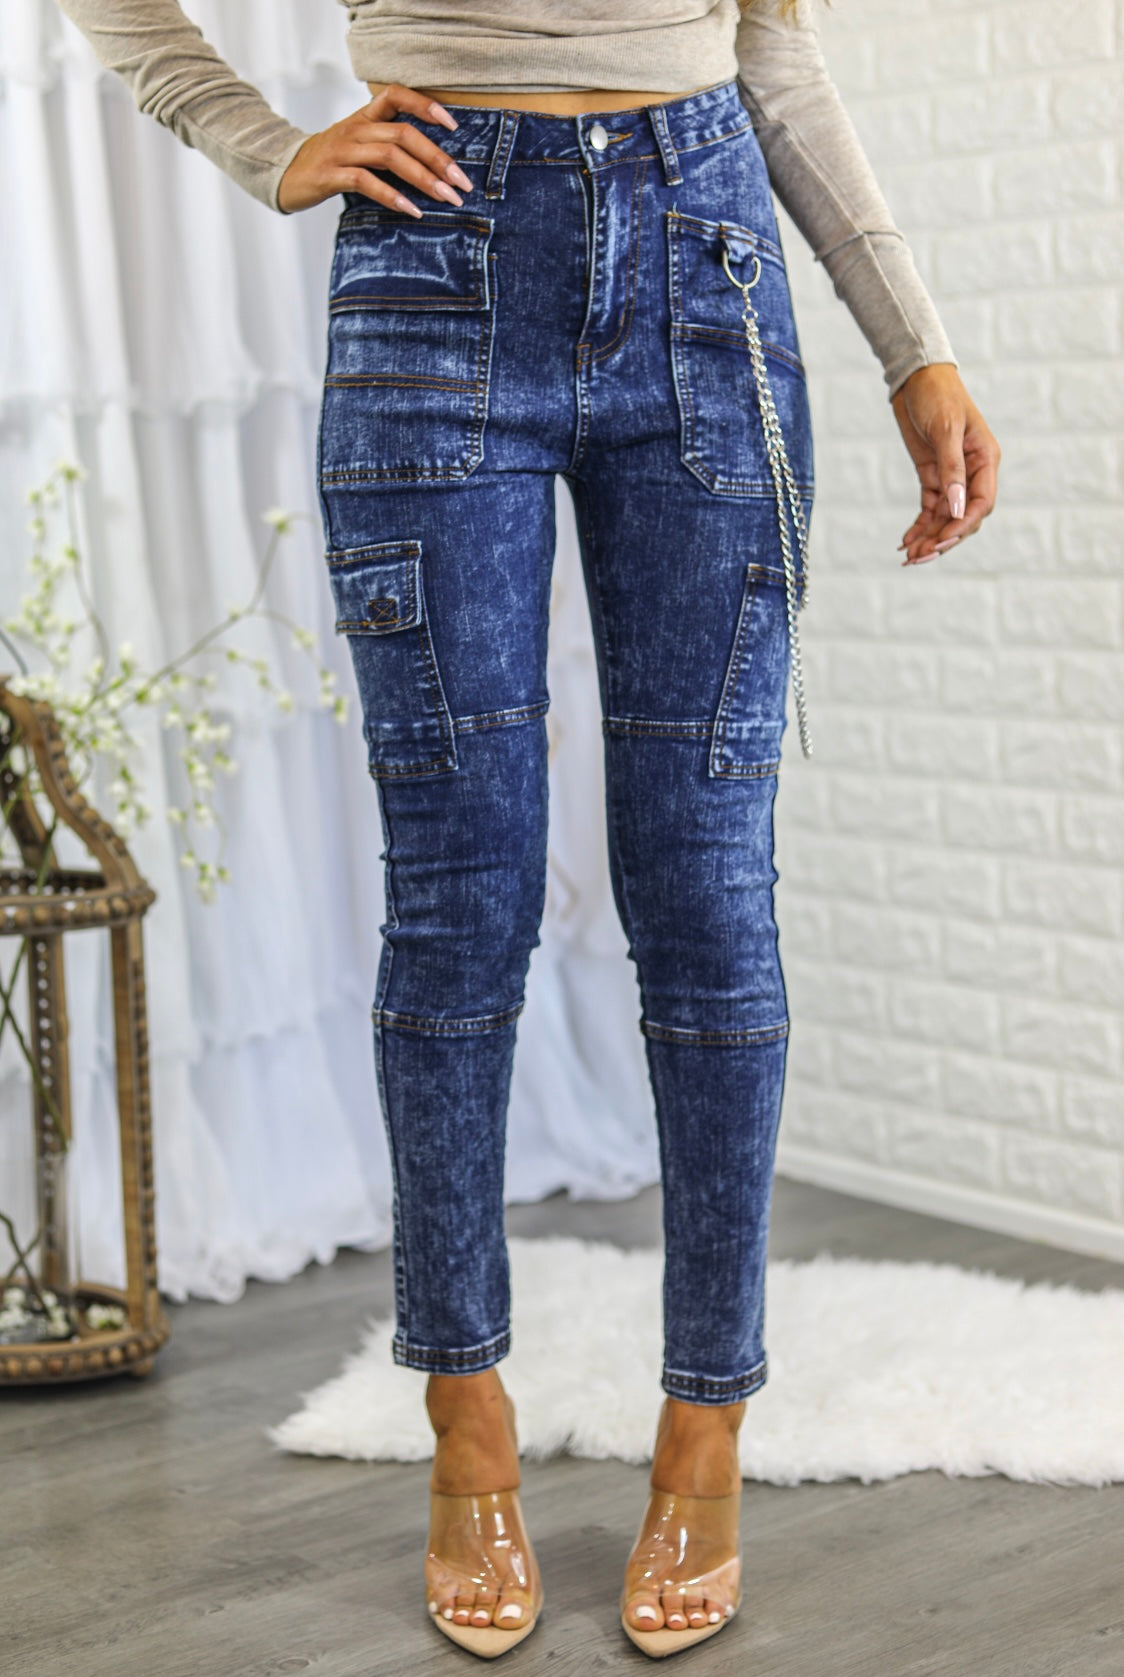 Mineral Wash High Waisted Cargo Style Skinny Jeans